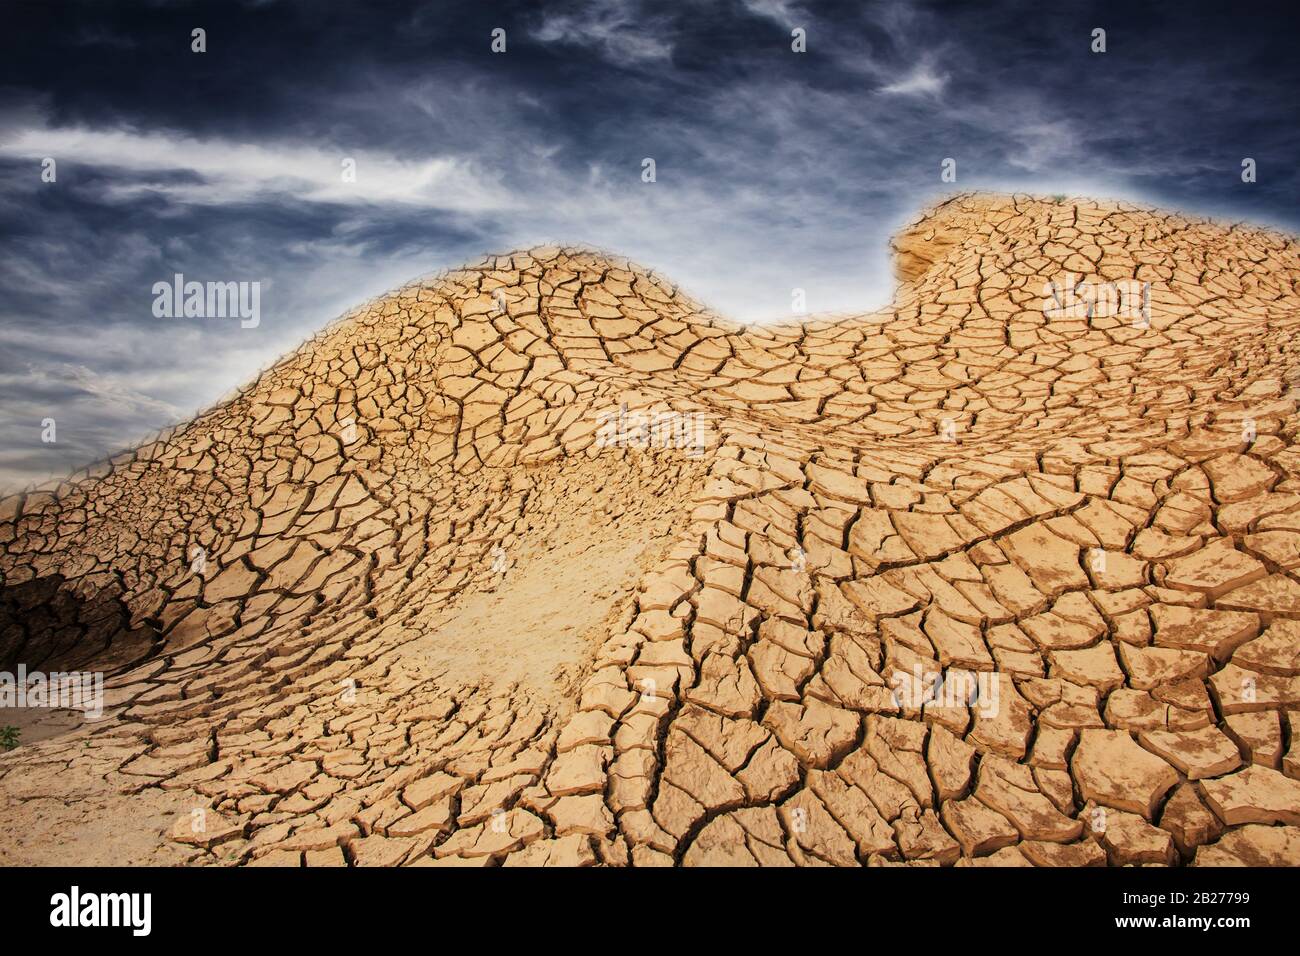 Dried land in the desert. Cracked soil crust Stock Photo